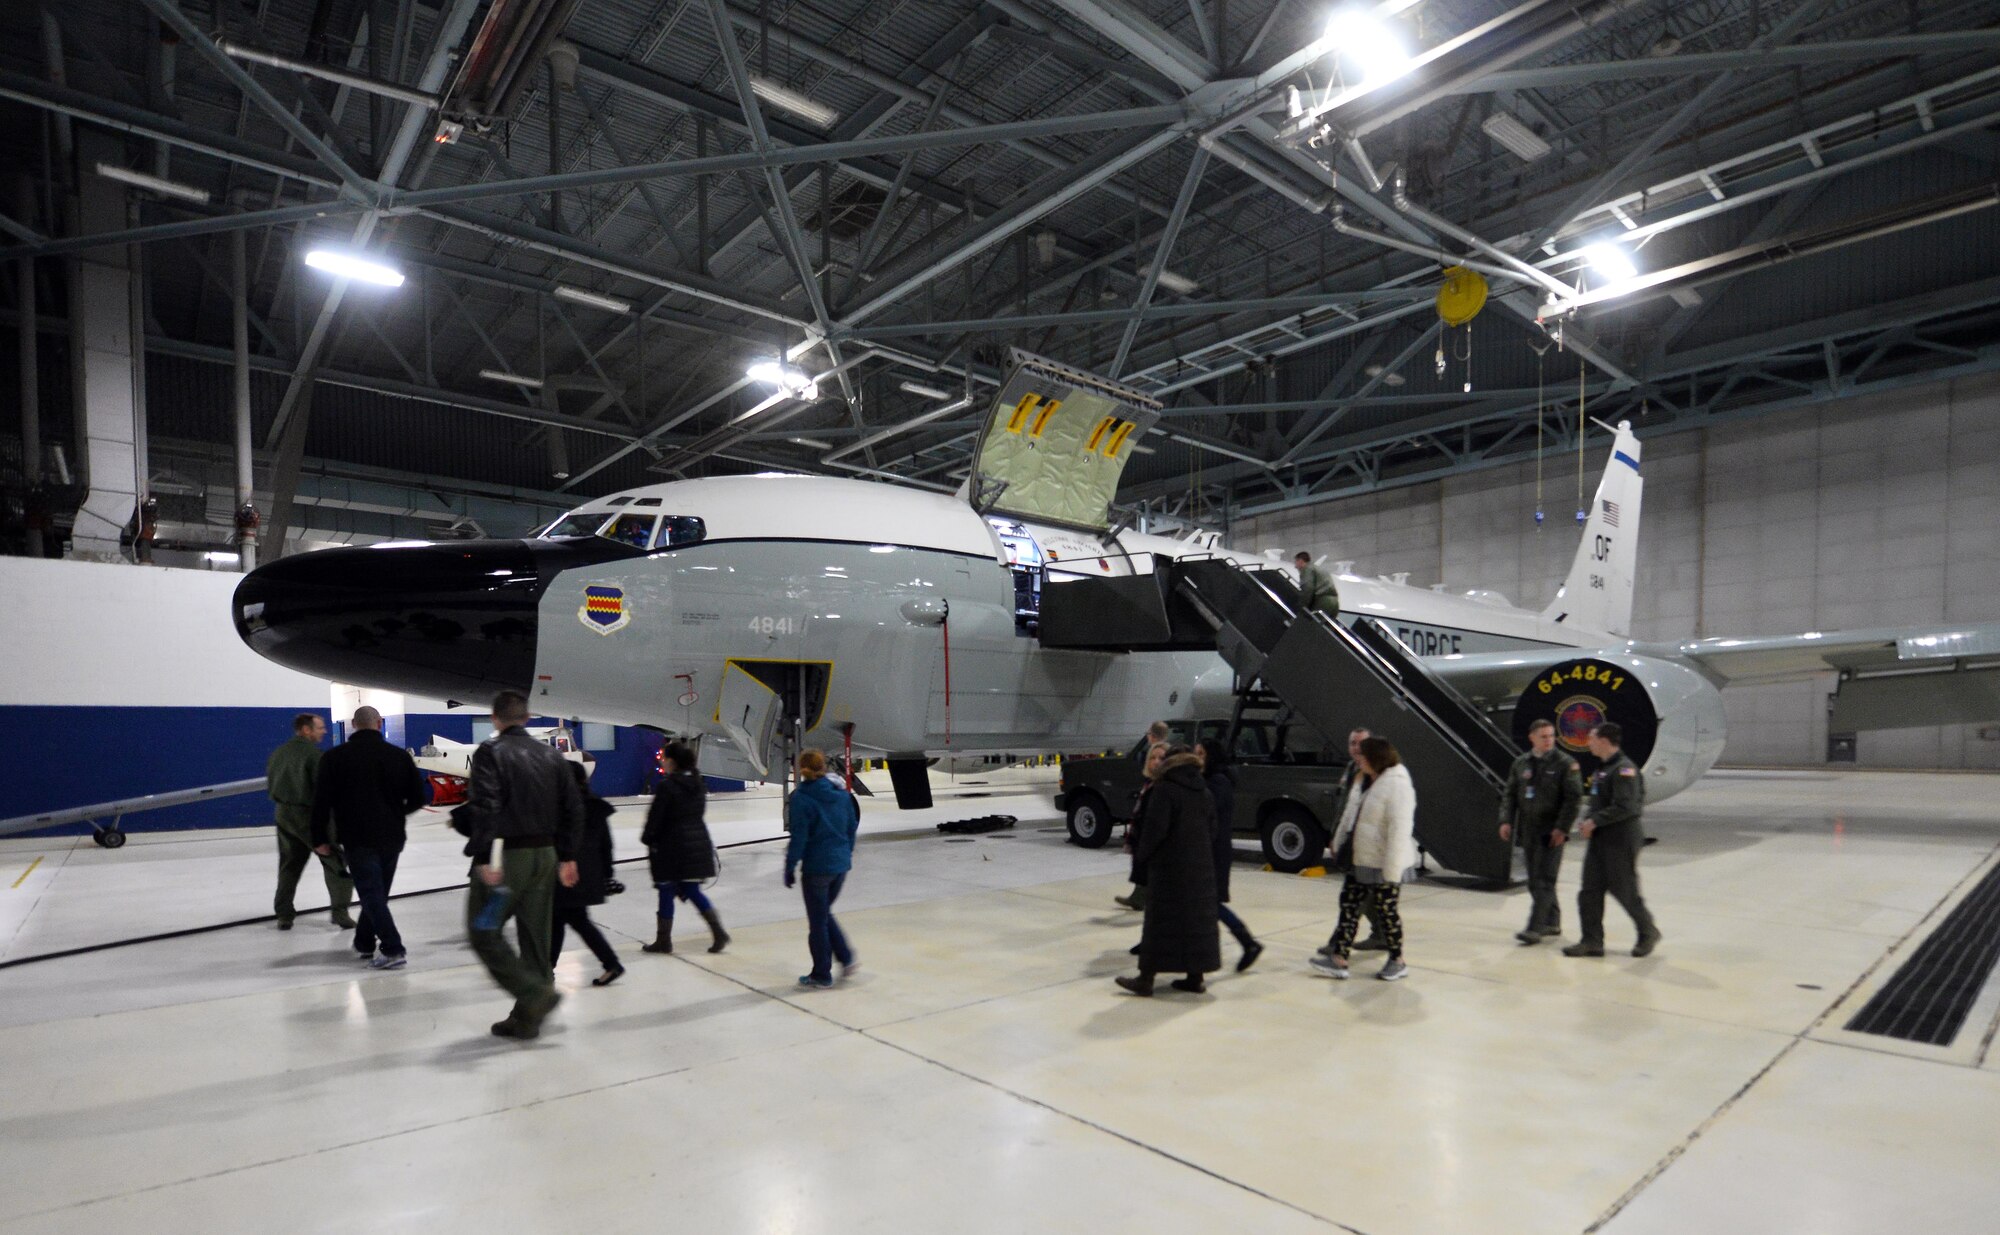 Spouses associated with the 55th Wing get a static tour of an RC-135 Aircraft parked in a hangar of the Bennie Davis Maintenance Facility as part of Spouse Appreciation Night, Dec. 7, 2016, at Offutt Air Force Base, Neb. Spouses of both officers and enlisted Airmen from various squadron participated in the first appreciation night.  Future tours are already being slated for future dates. (U.S. Air Force photo by Josh Plueger)